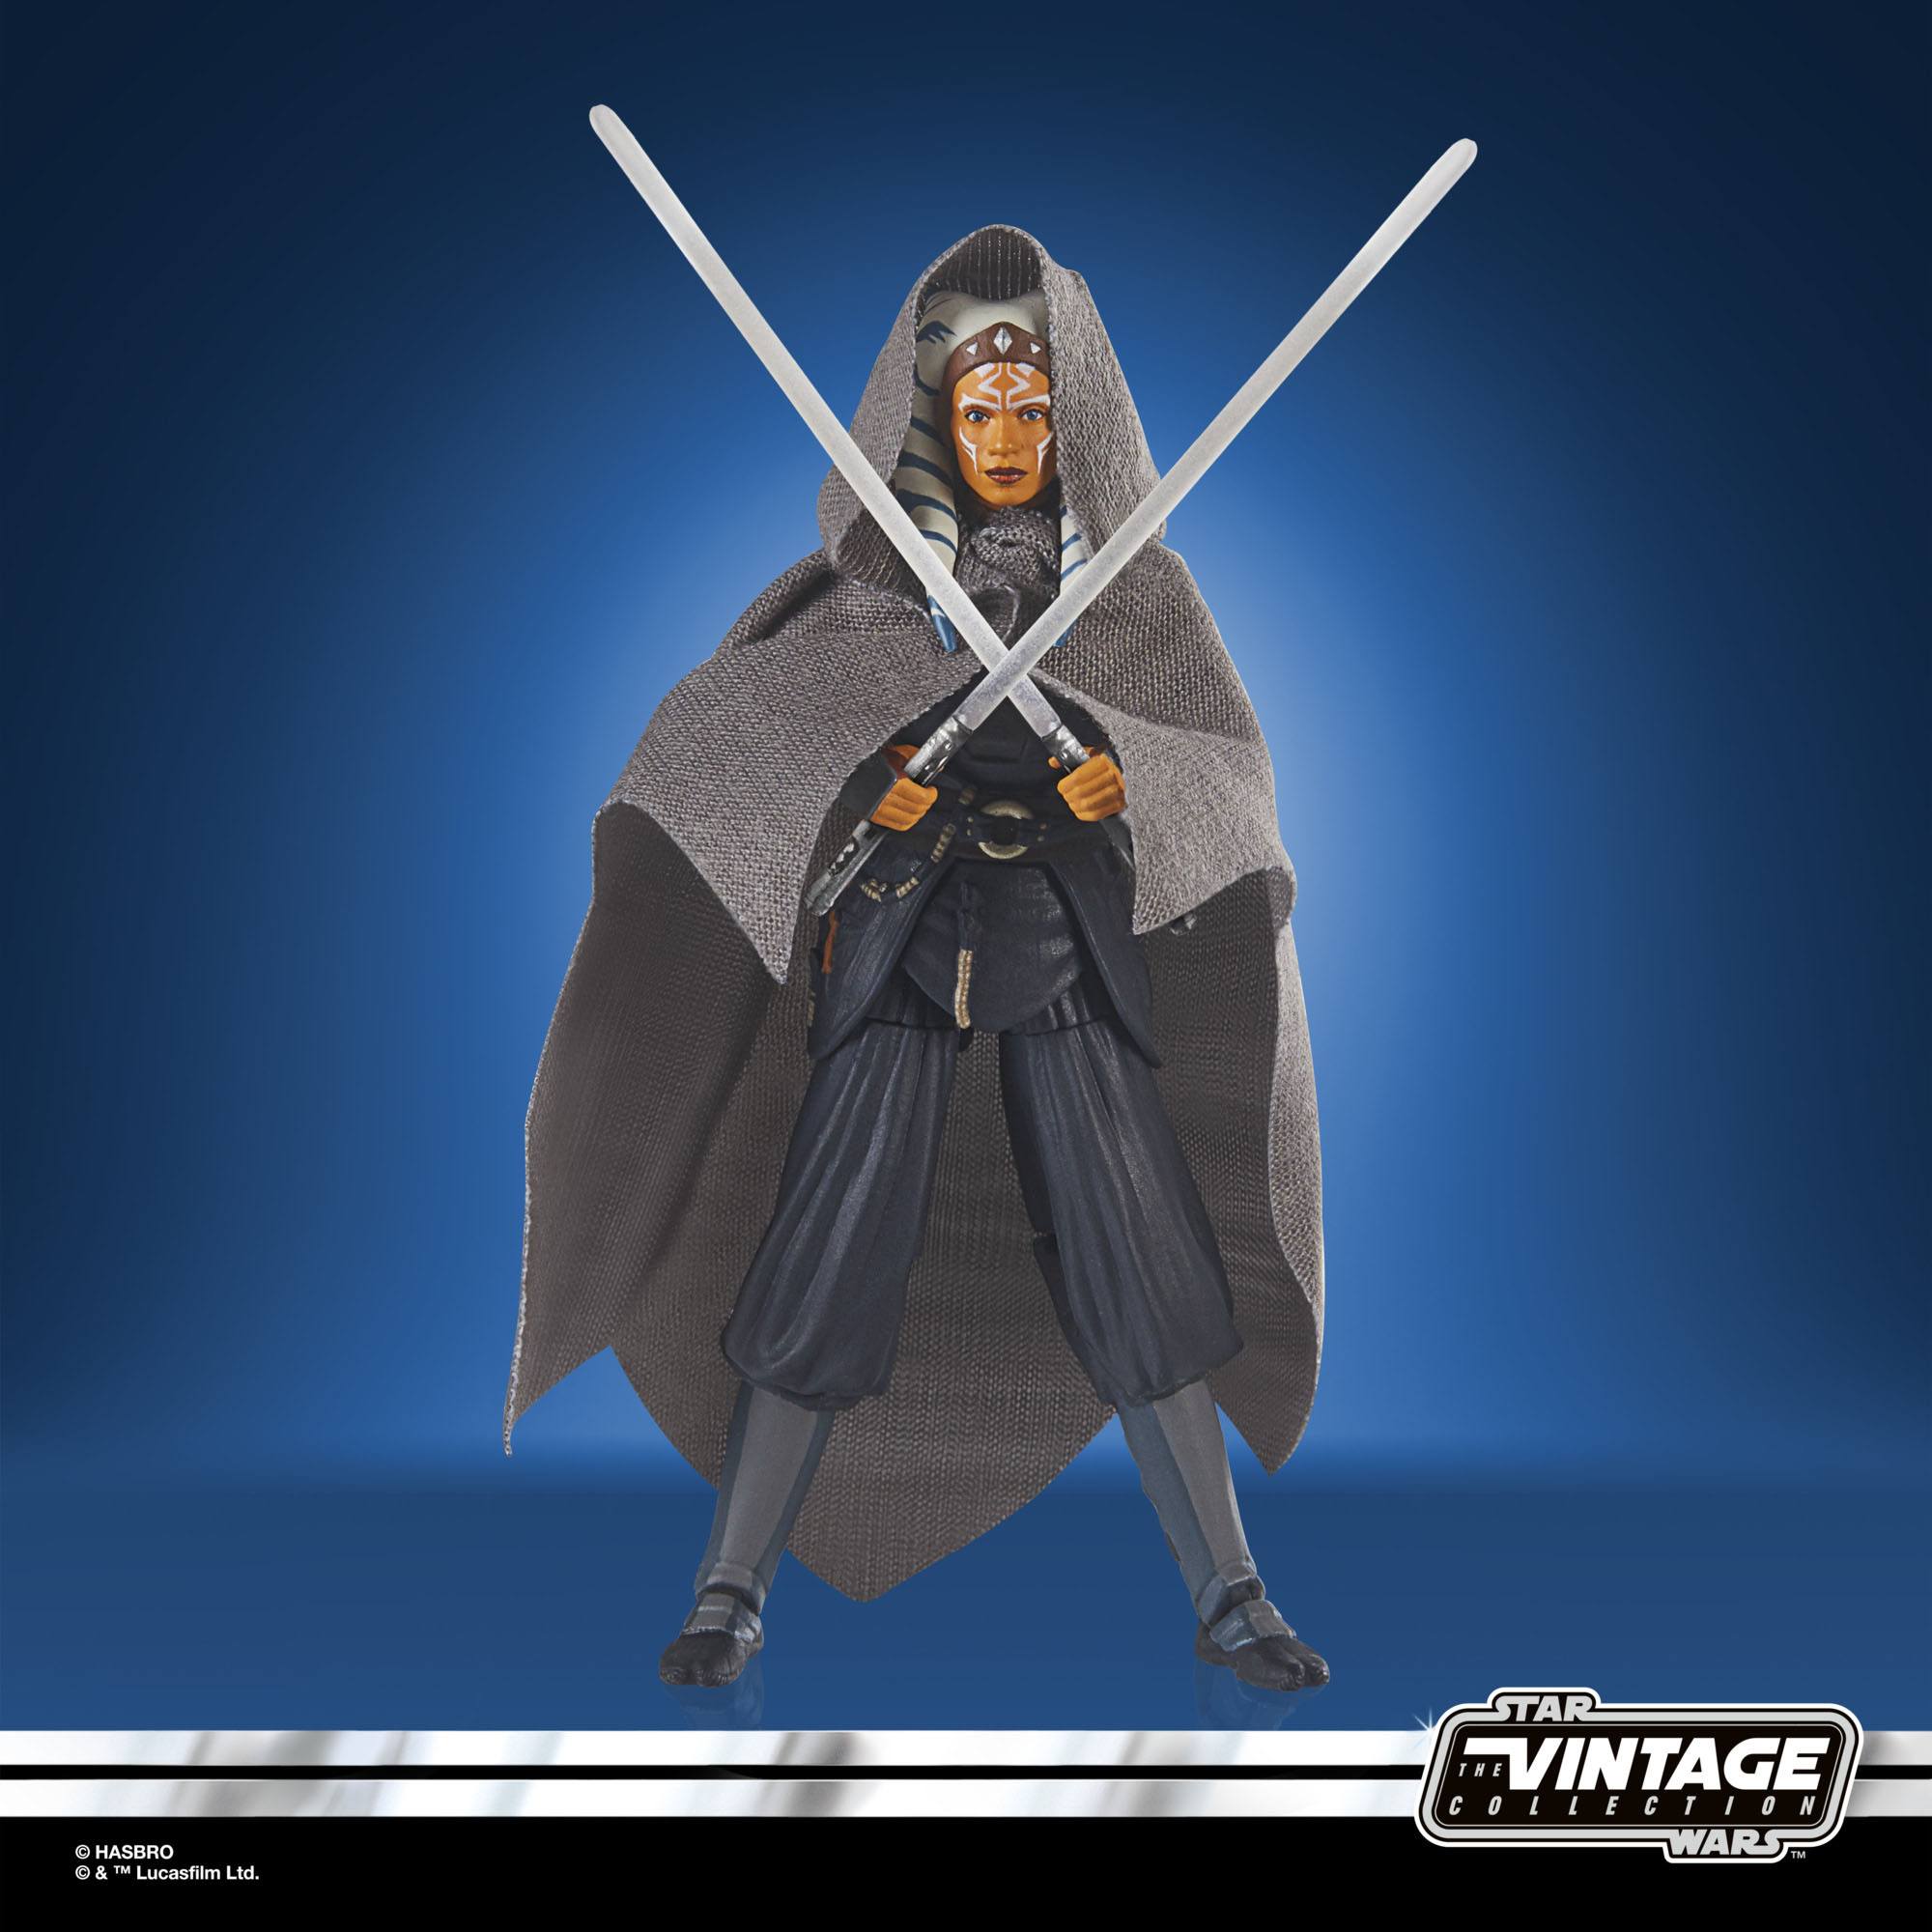 Star Wars The Vintage Collection Deluxe Ahsoka Tano & Grogu F55765L00 5010993964970